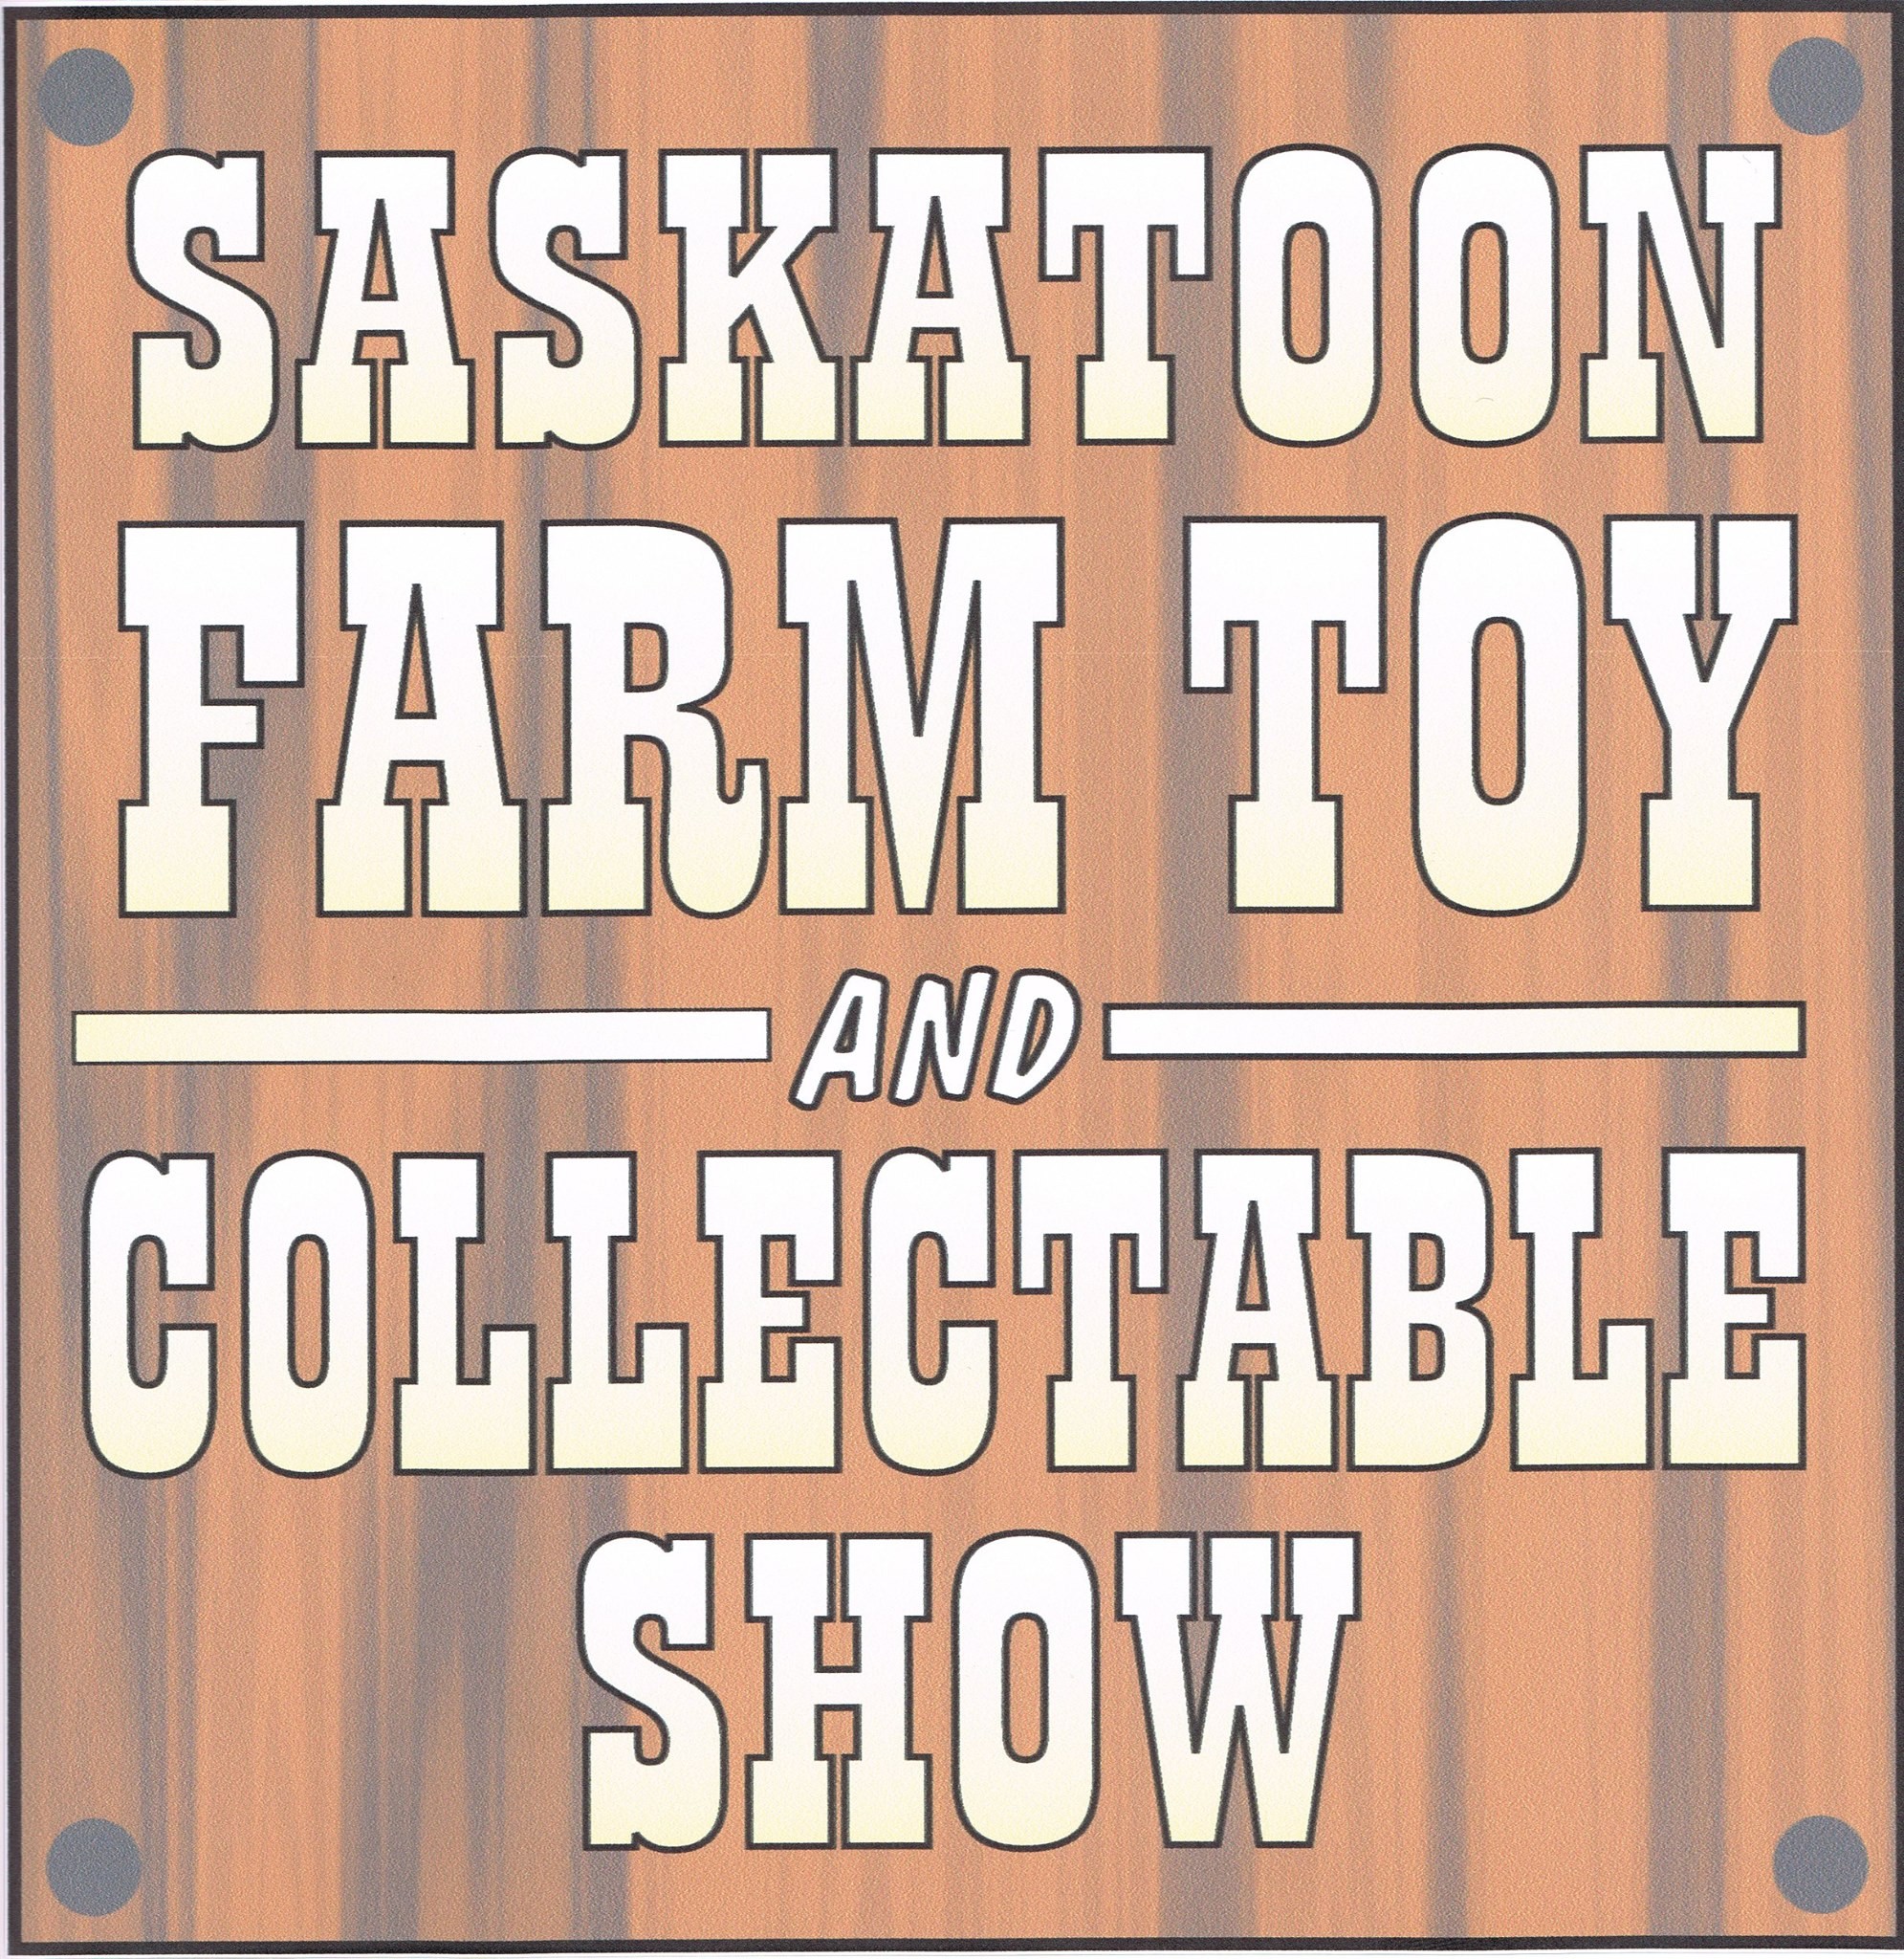 Farm Toy and Collectible Show